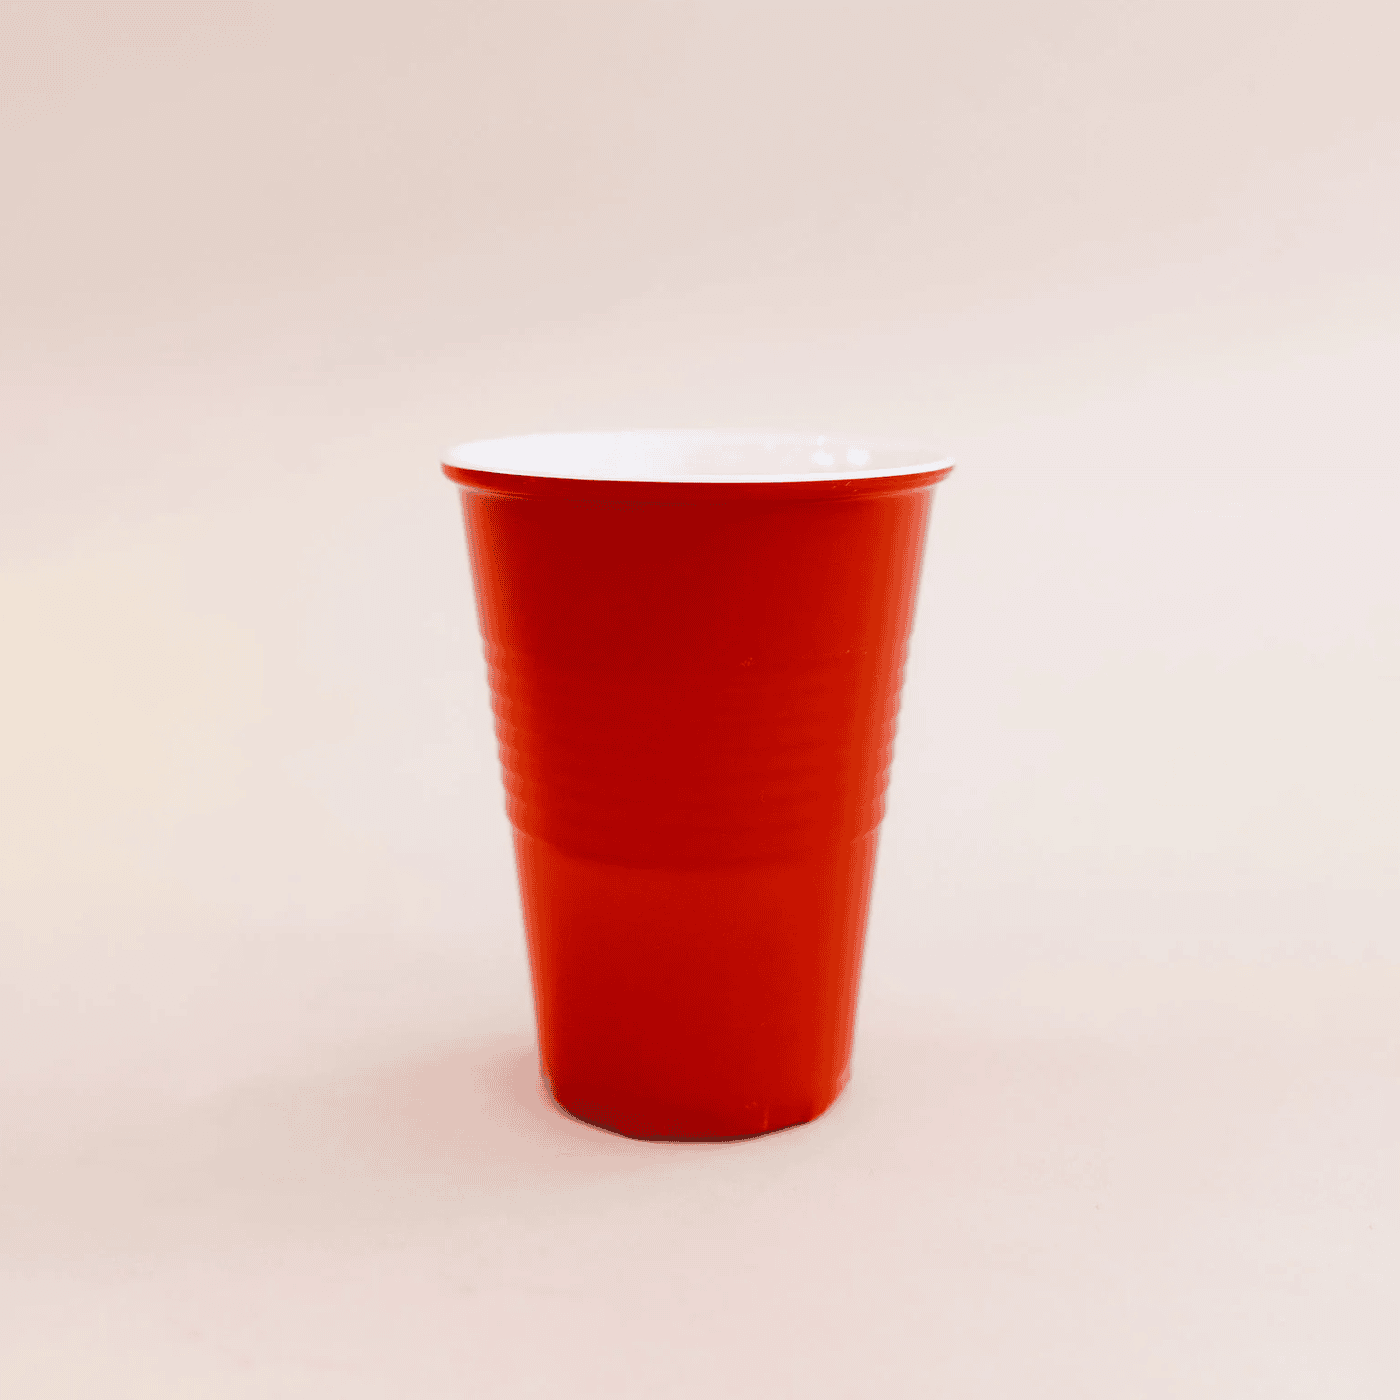 The Magic Balloons - Red Glass, 360ml Reusable and Recyclable Red Drinking Cups Pack of 50pcs -12oz Leakproof Drinking Glasses Great for Cold Drinks, Juices, Games and More Party & Event Supplies